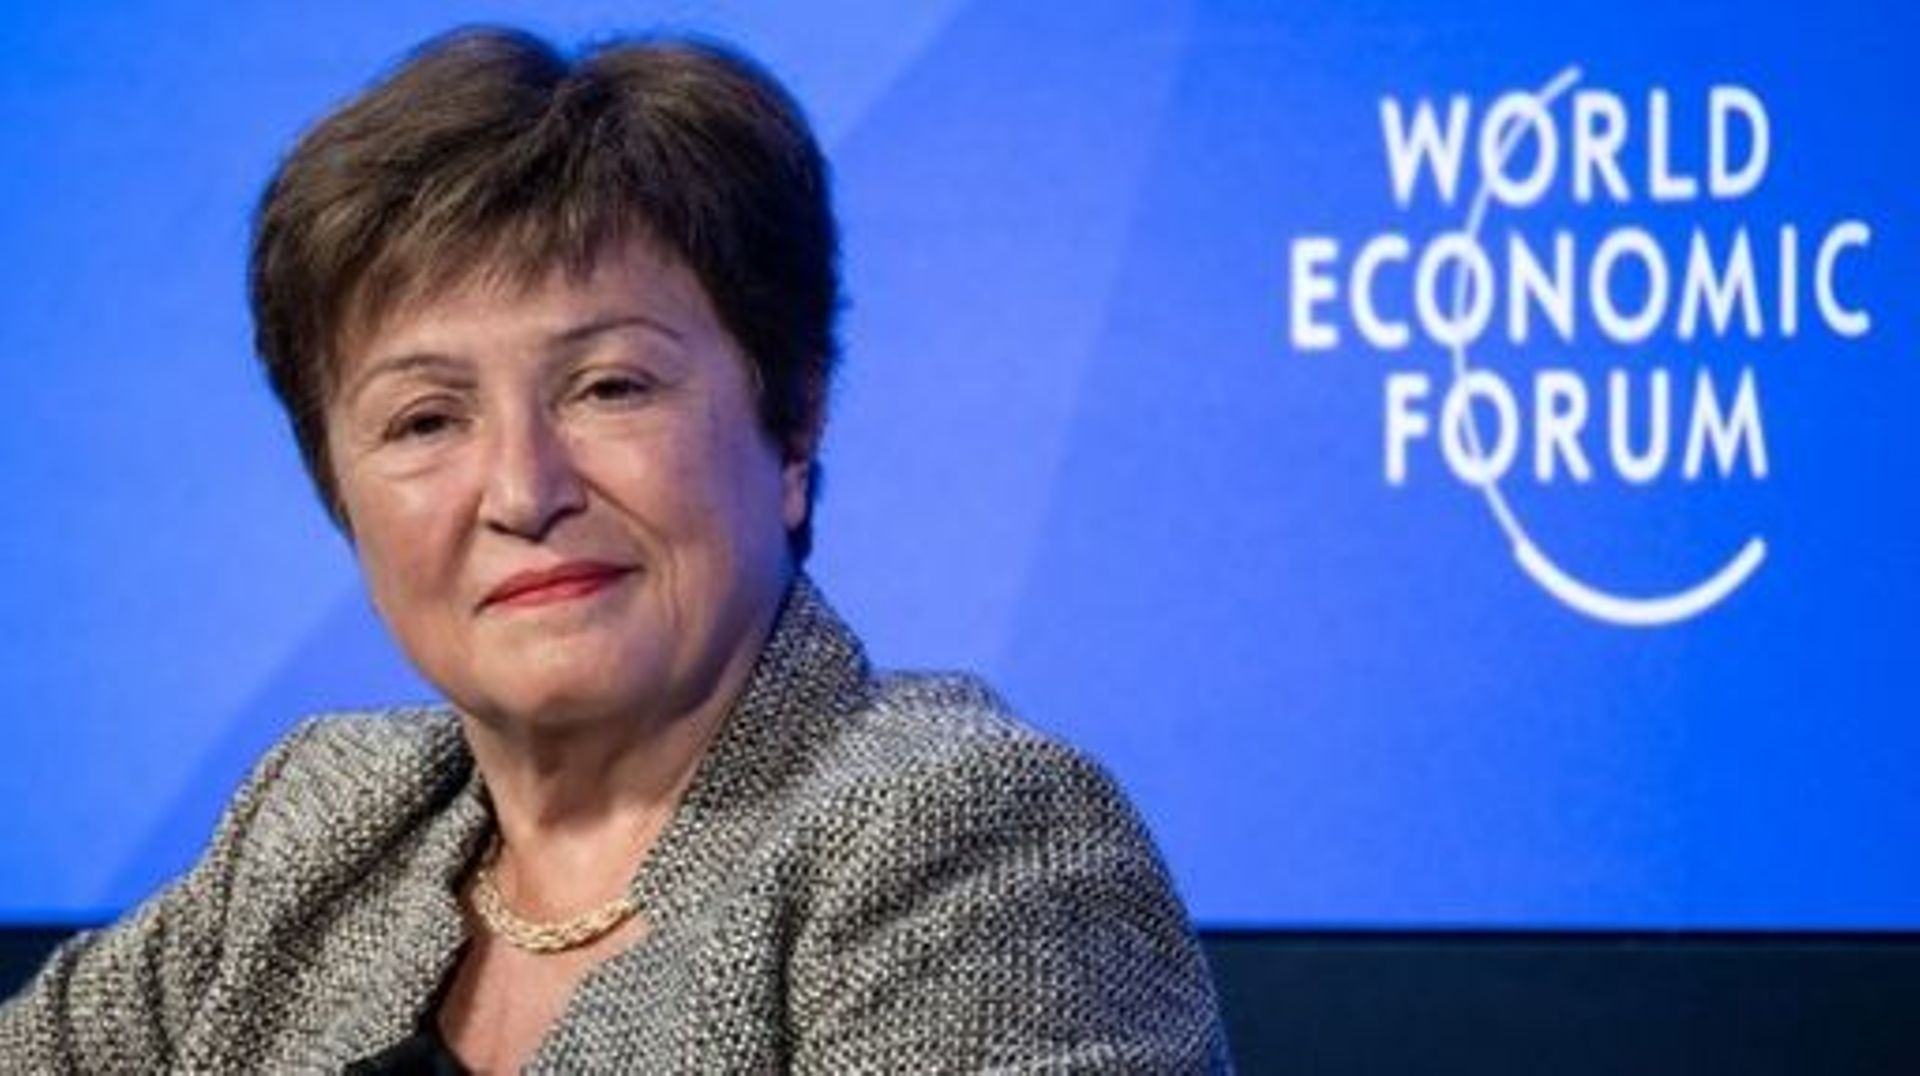 International Monetary Fund (IMF) Managing Director Kristalina Georgieva attends a session at the World Economic Forum (WEF) annual meeting in Davos on January 17, 2023.  Fabrice COFFRINI / AFP